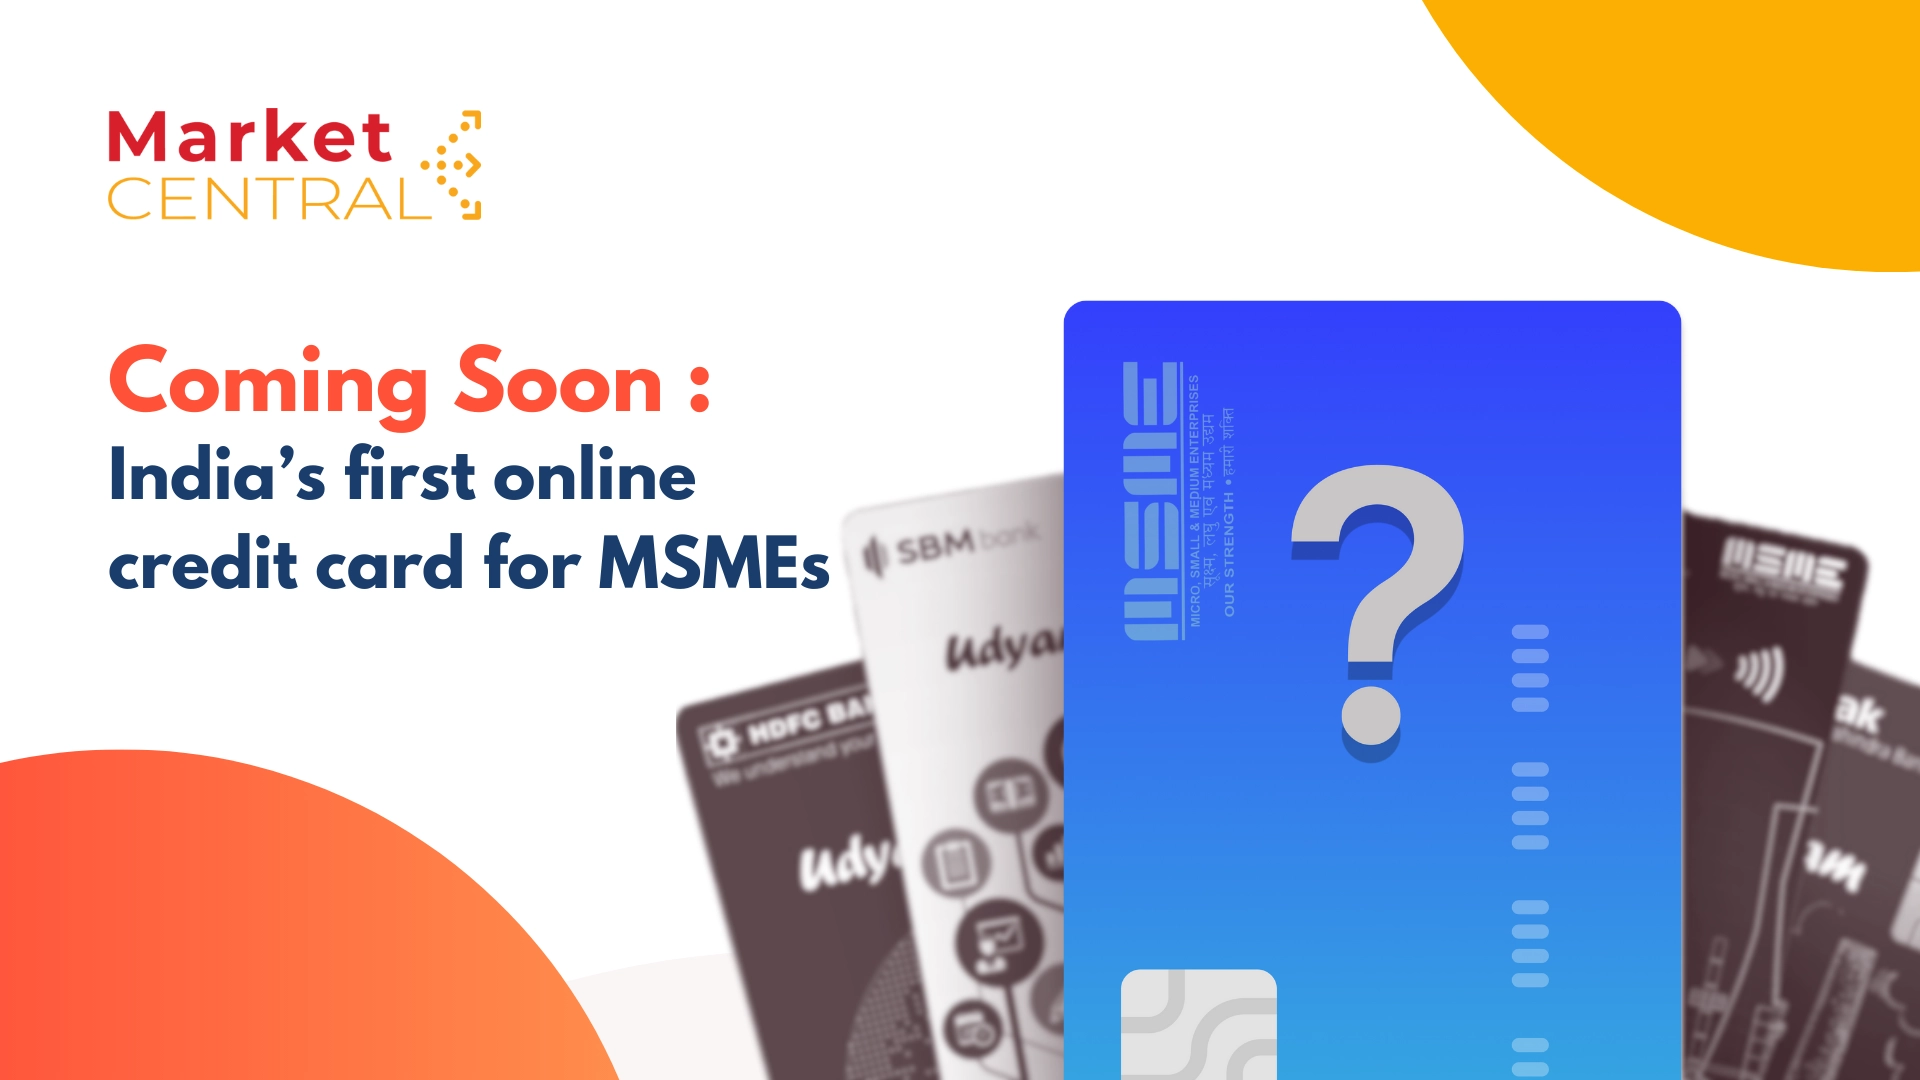 Credit cards for MSMEs